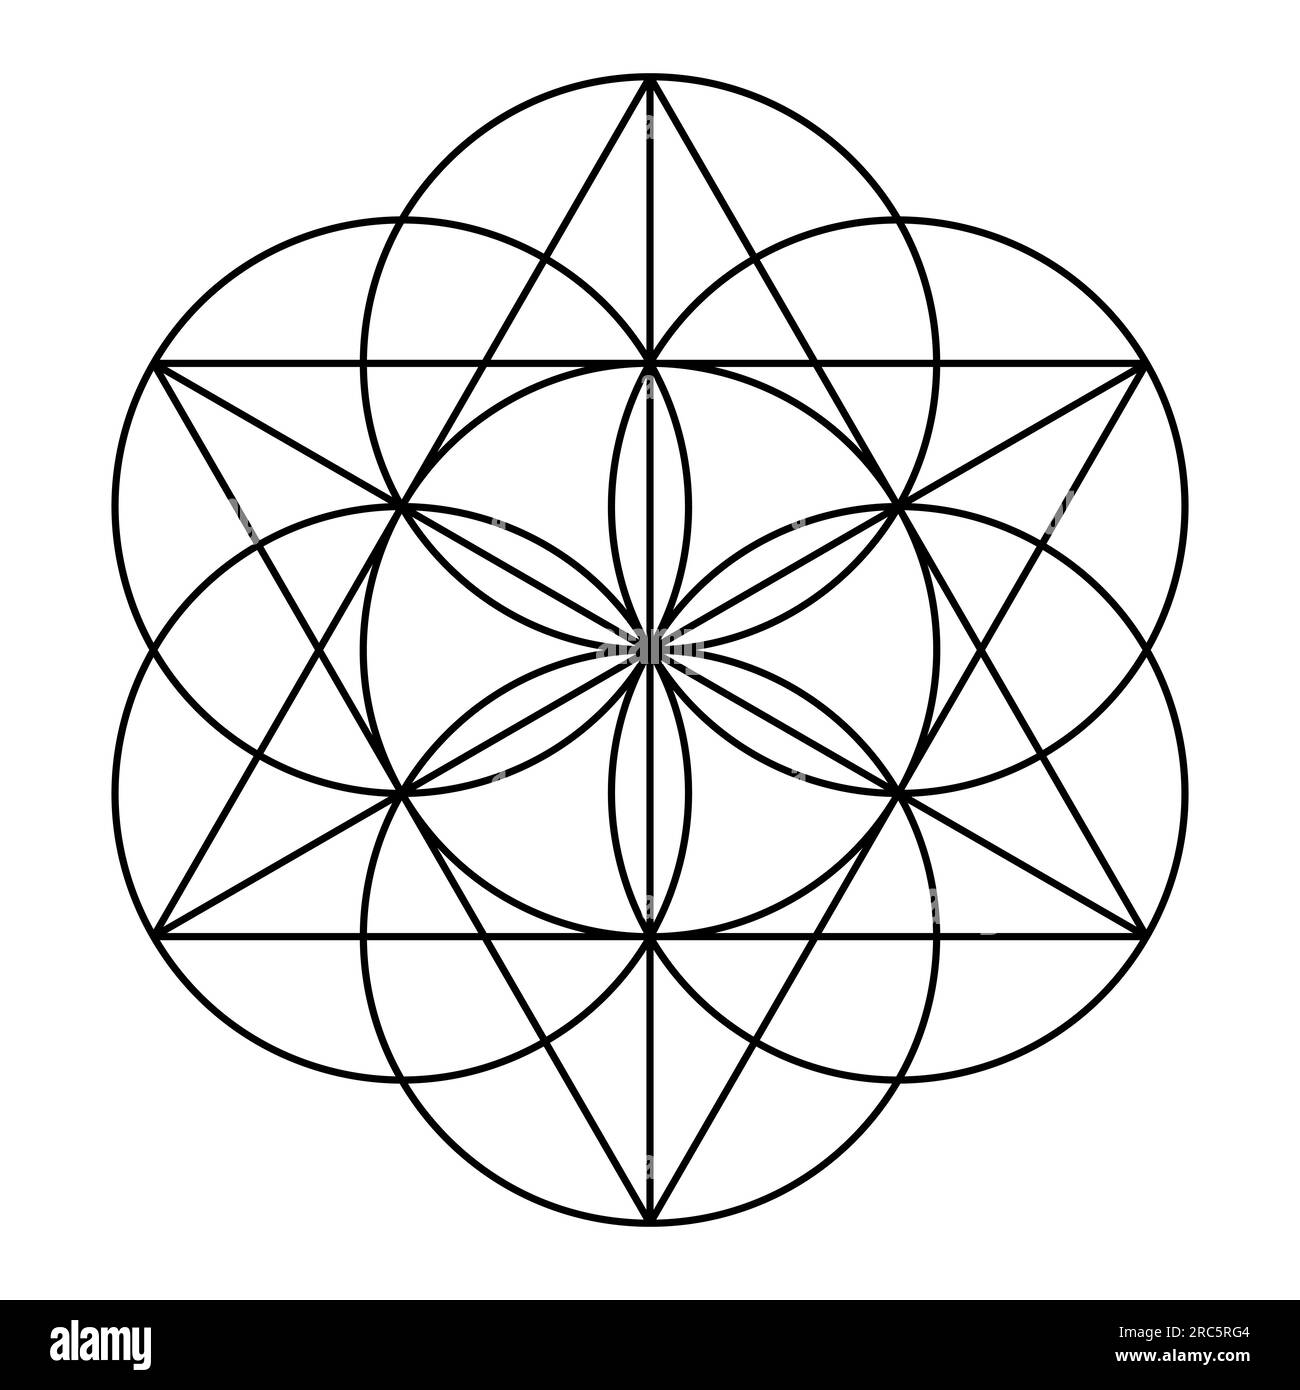 Seed of Life, seven overlapping circles, form the basic shape to create a hexagram (sexagram), an ancient geometric figure and Sacred Geometry. Stock Photo